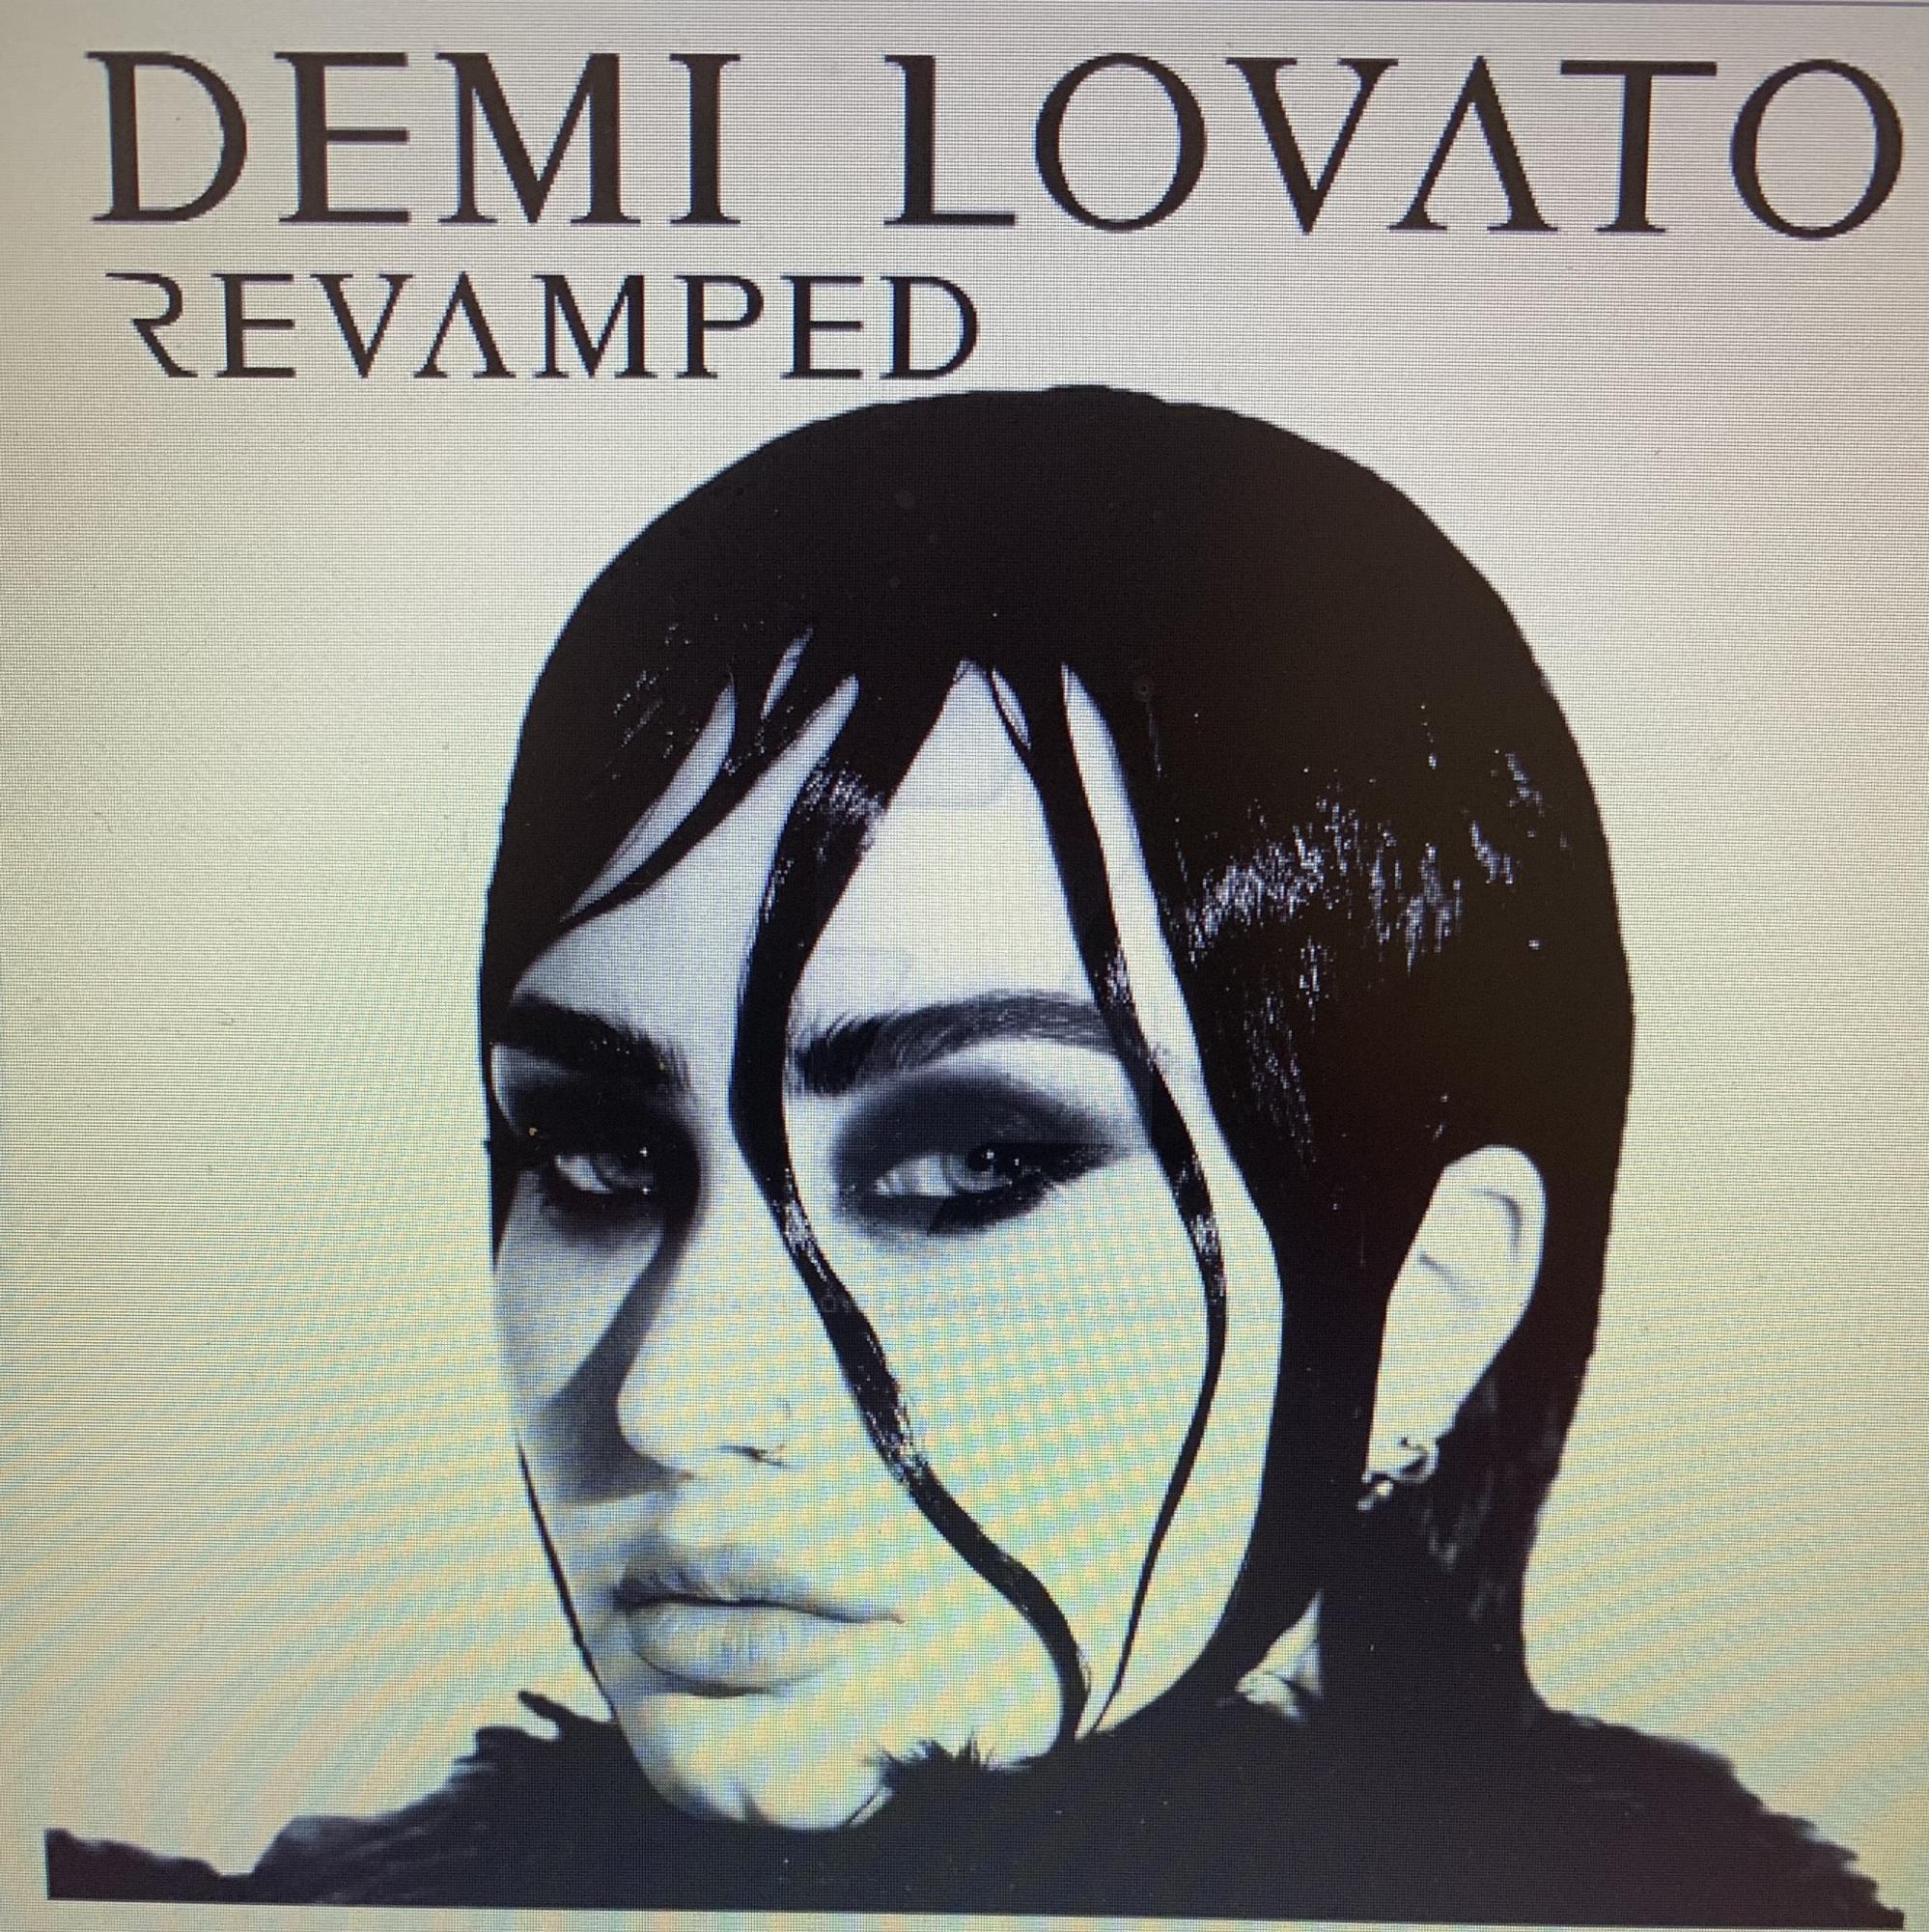  Demi Lovatos new album cover for the upcoming album REVAMPED.